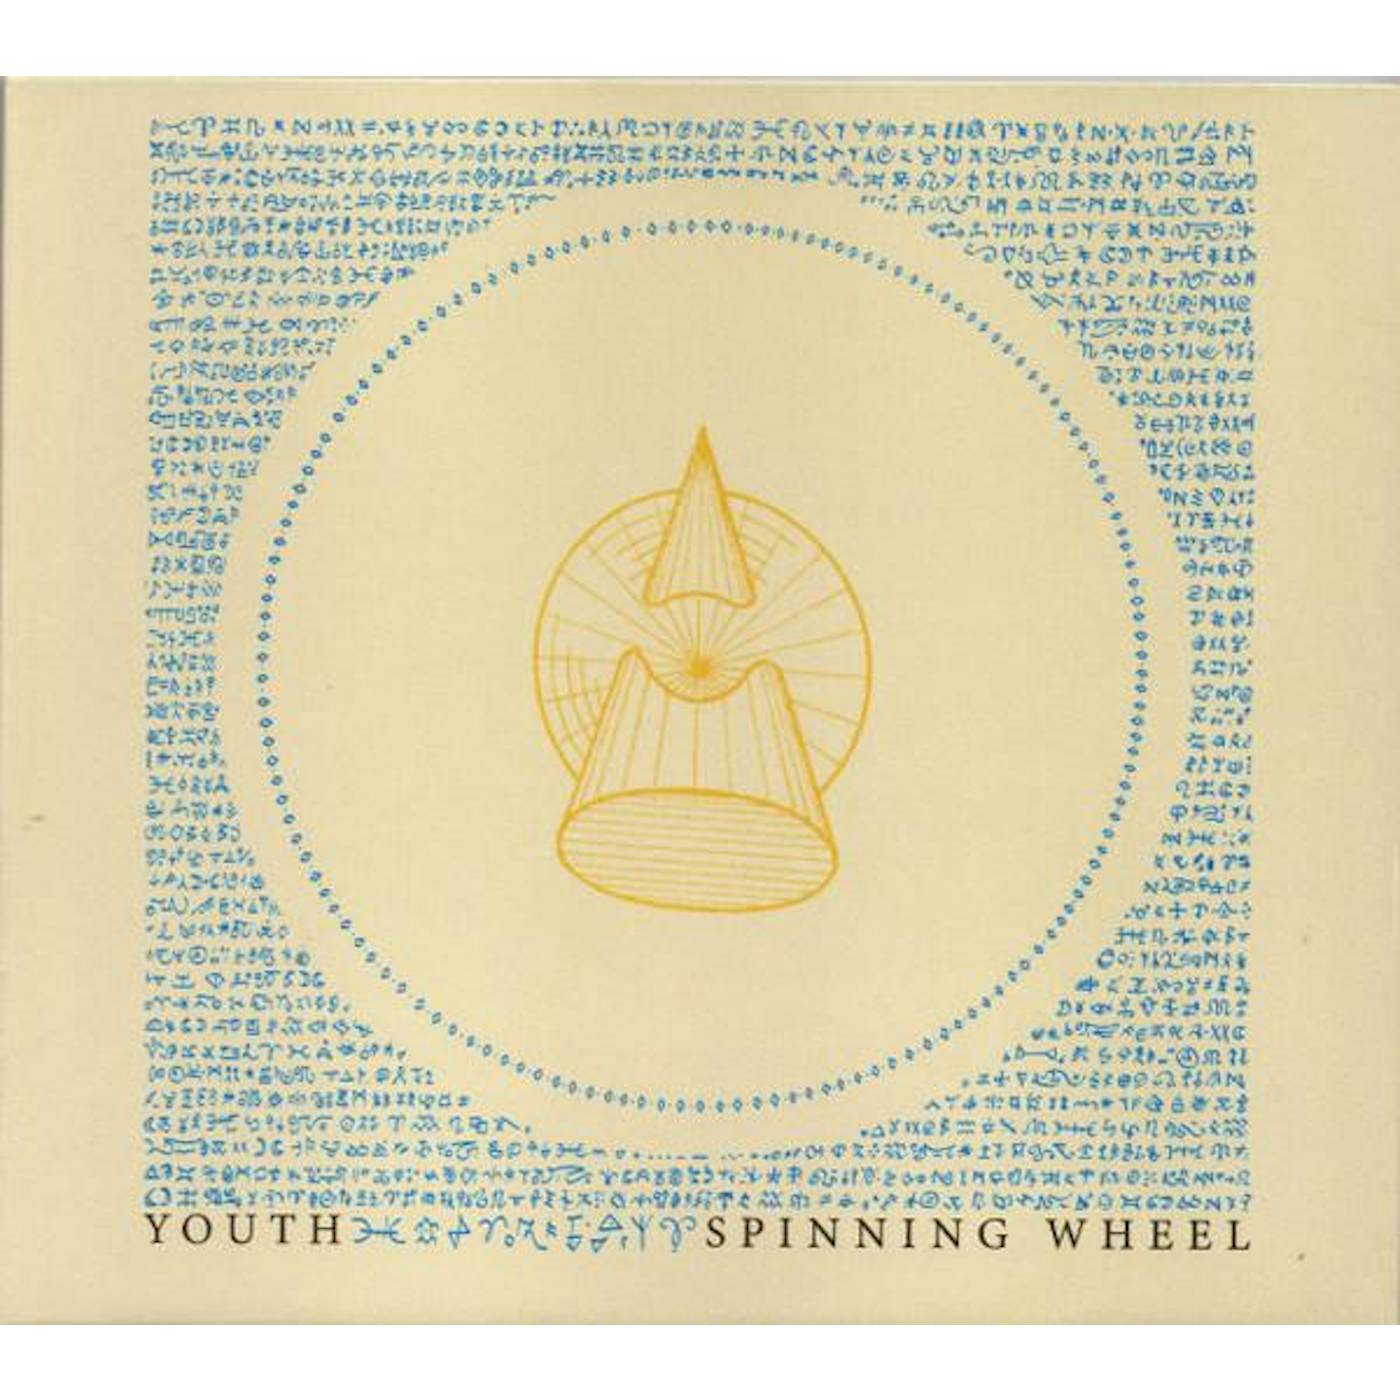 Youth SPINNING WHEEL CD